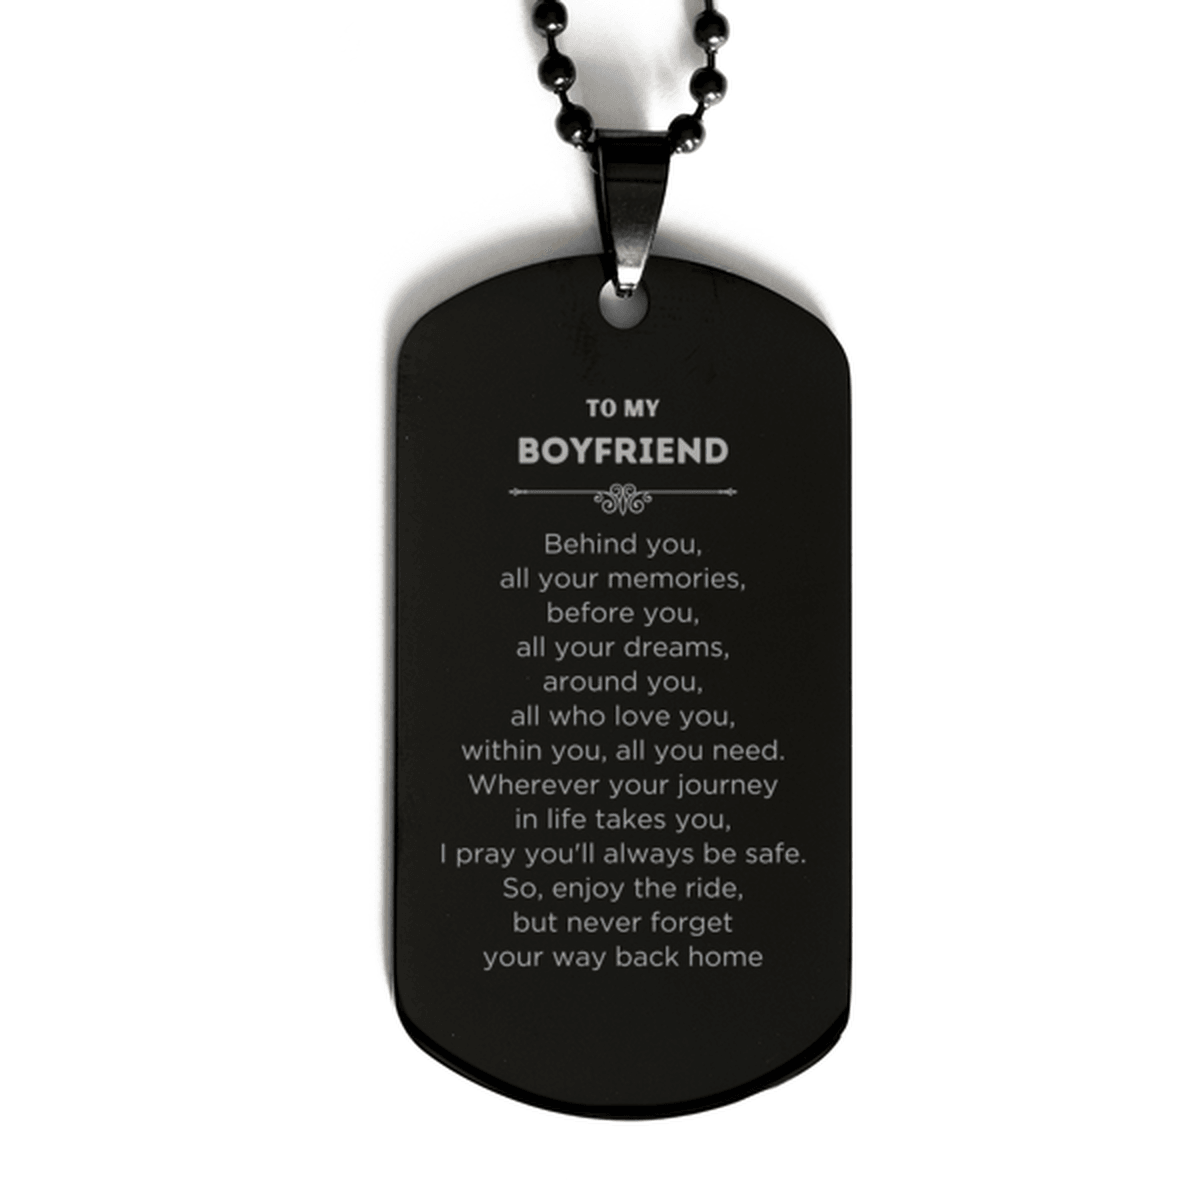 To My Boyfriend Gifts, Inspirational Boyfriend Black Dog Tag, Sentimental Birthday Christmas Unique Gifts For Boyfriend Behind you, all your memories, before you, all your dreams, around you, all who love you, within you, all you need - Mallard Moon Gift Shop